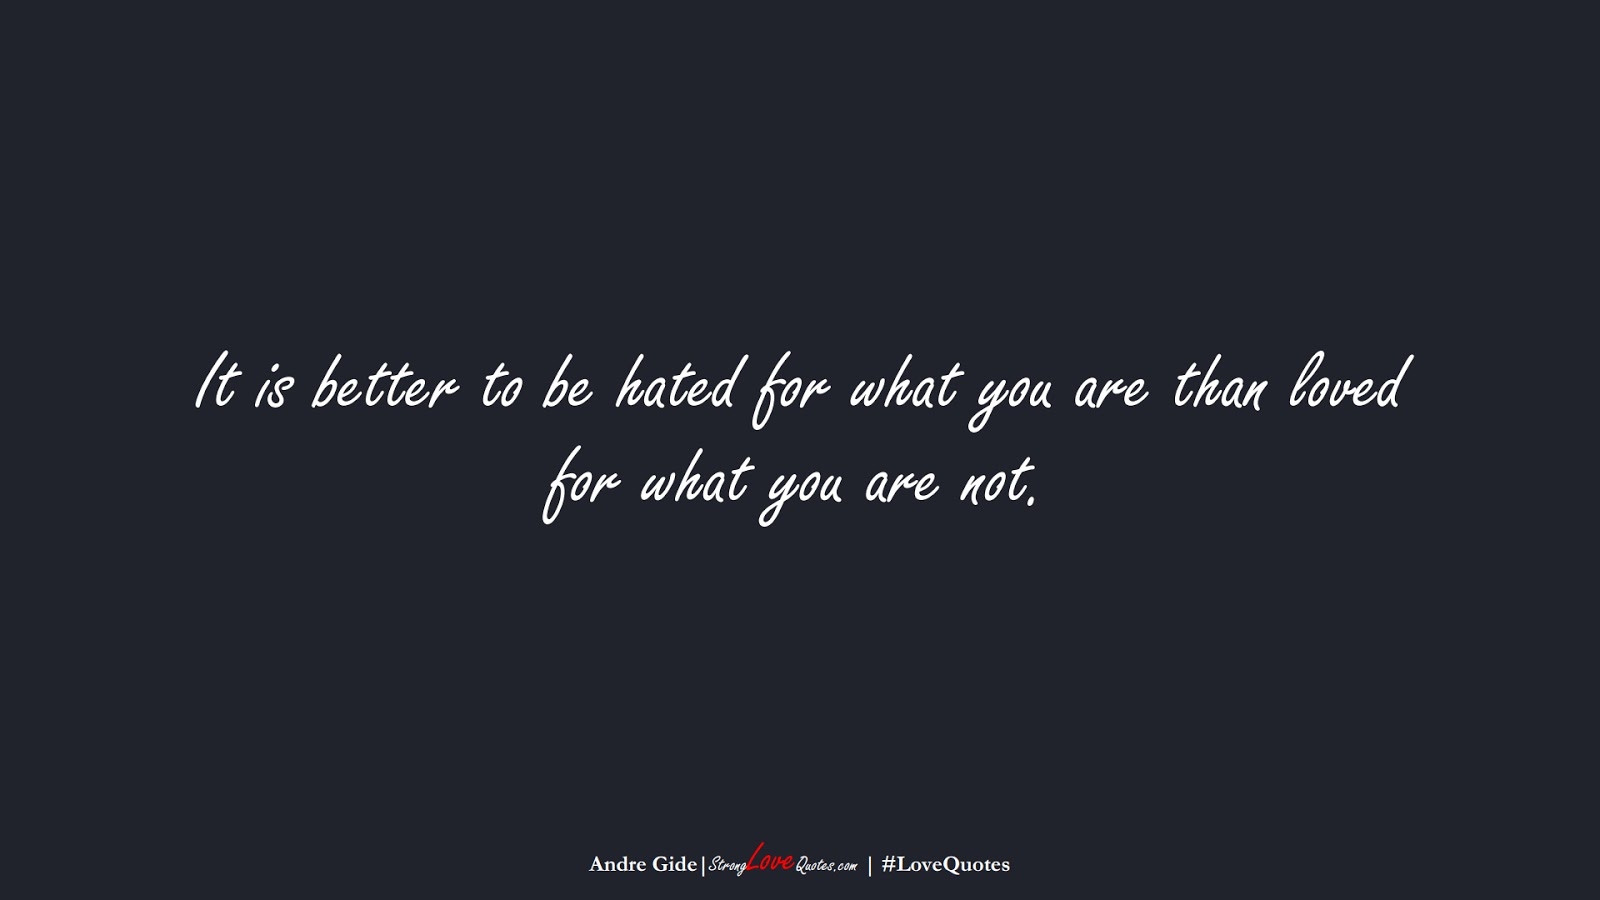 It is better to be hated for what you are than loved for what you are not. (Andre Gide);  #LoveQuotes